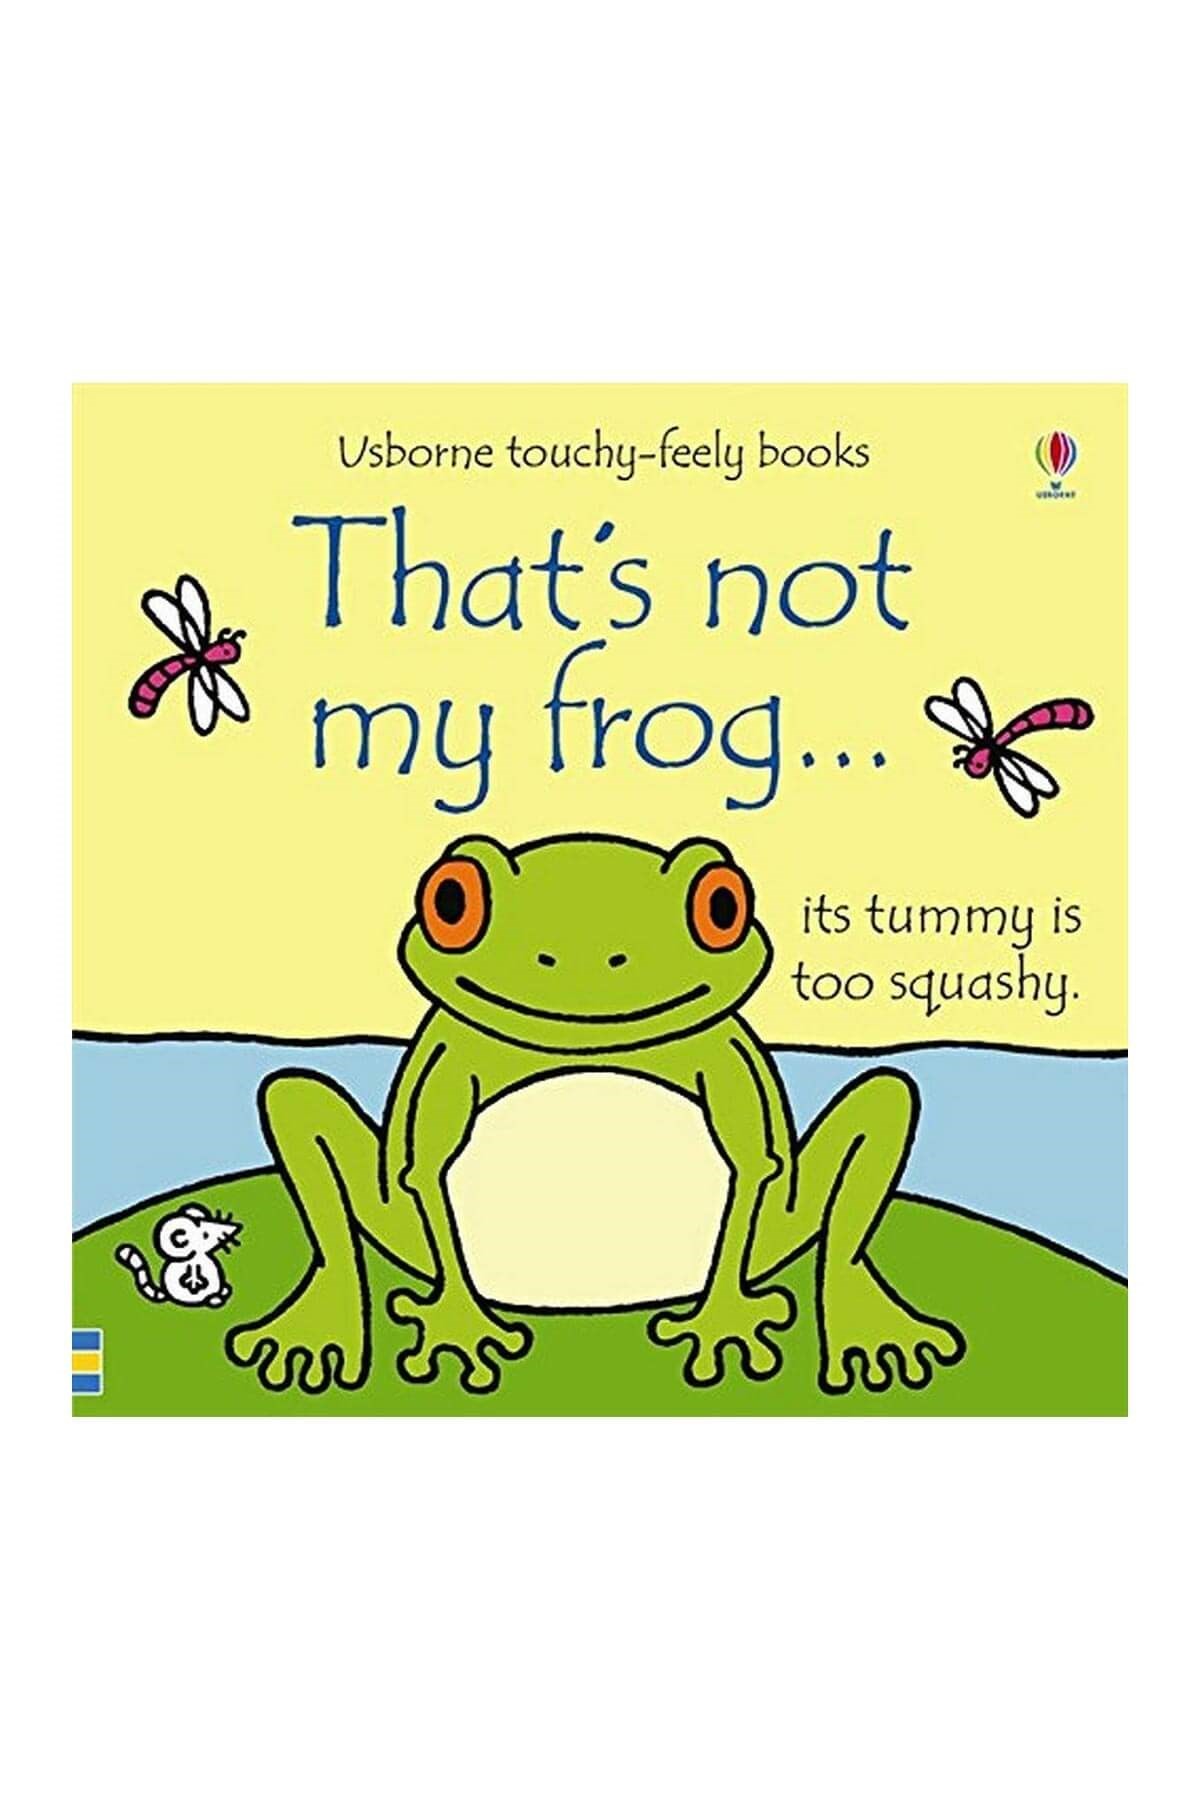 The Usborne That's Not My Frog